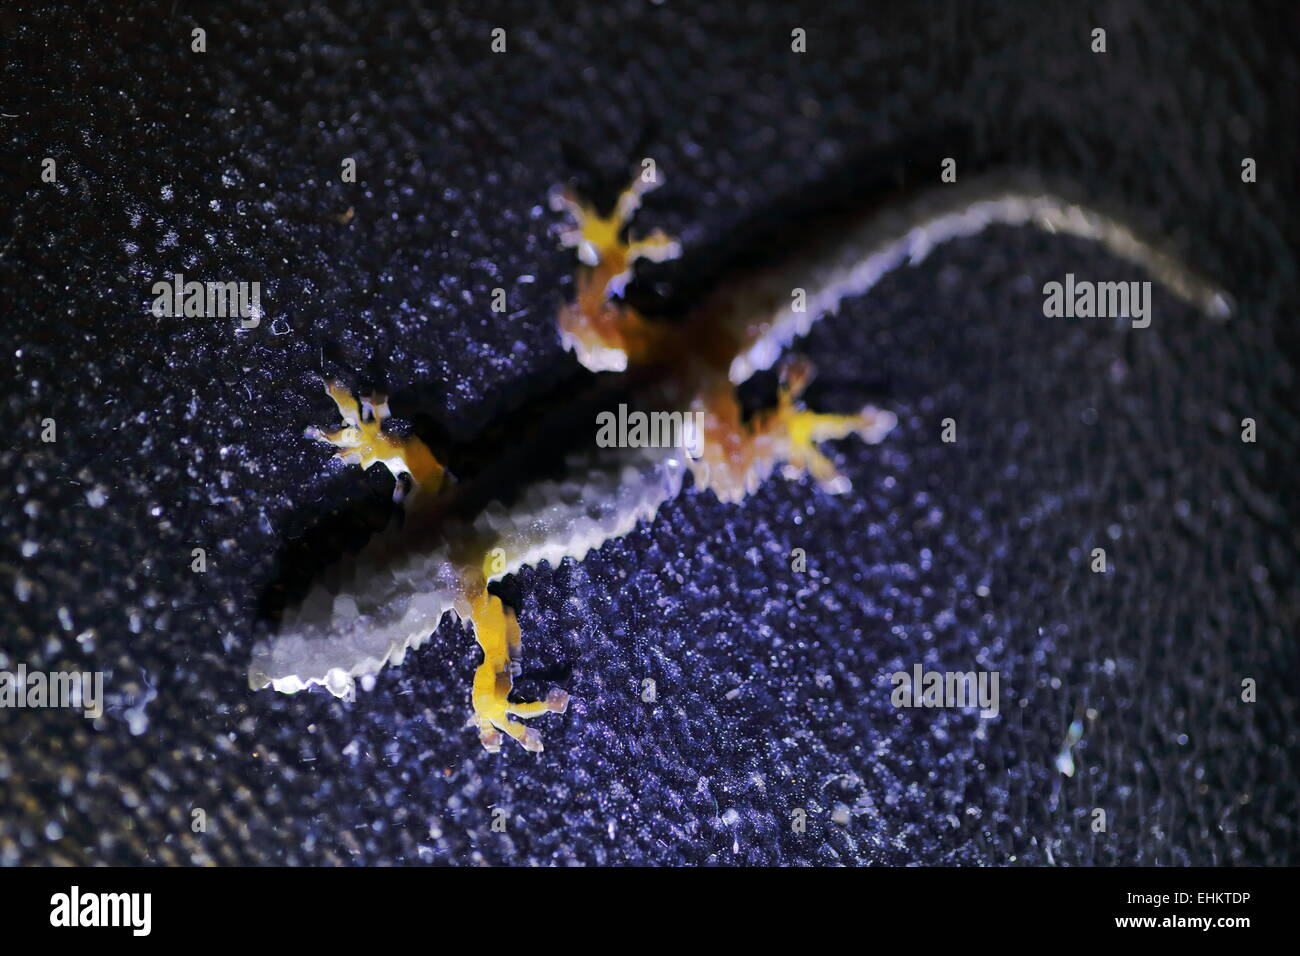 Backlit gecko on a frosted glass window pane Stock Photo